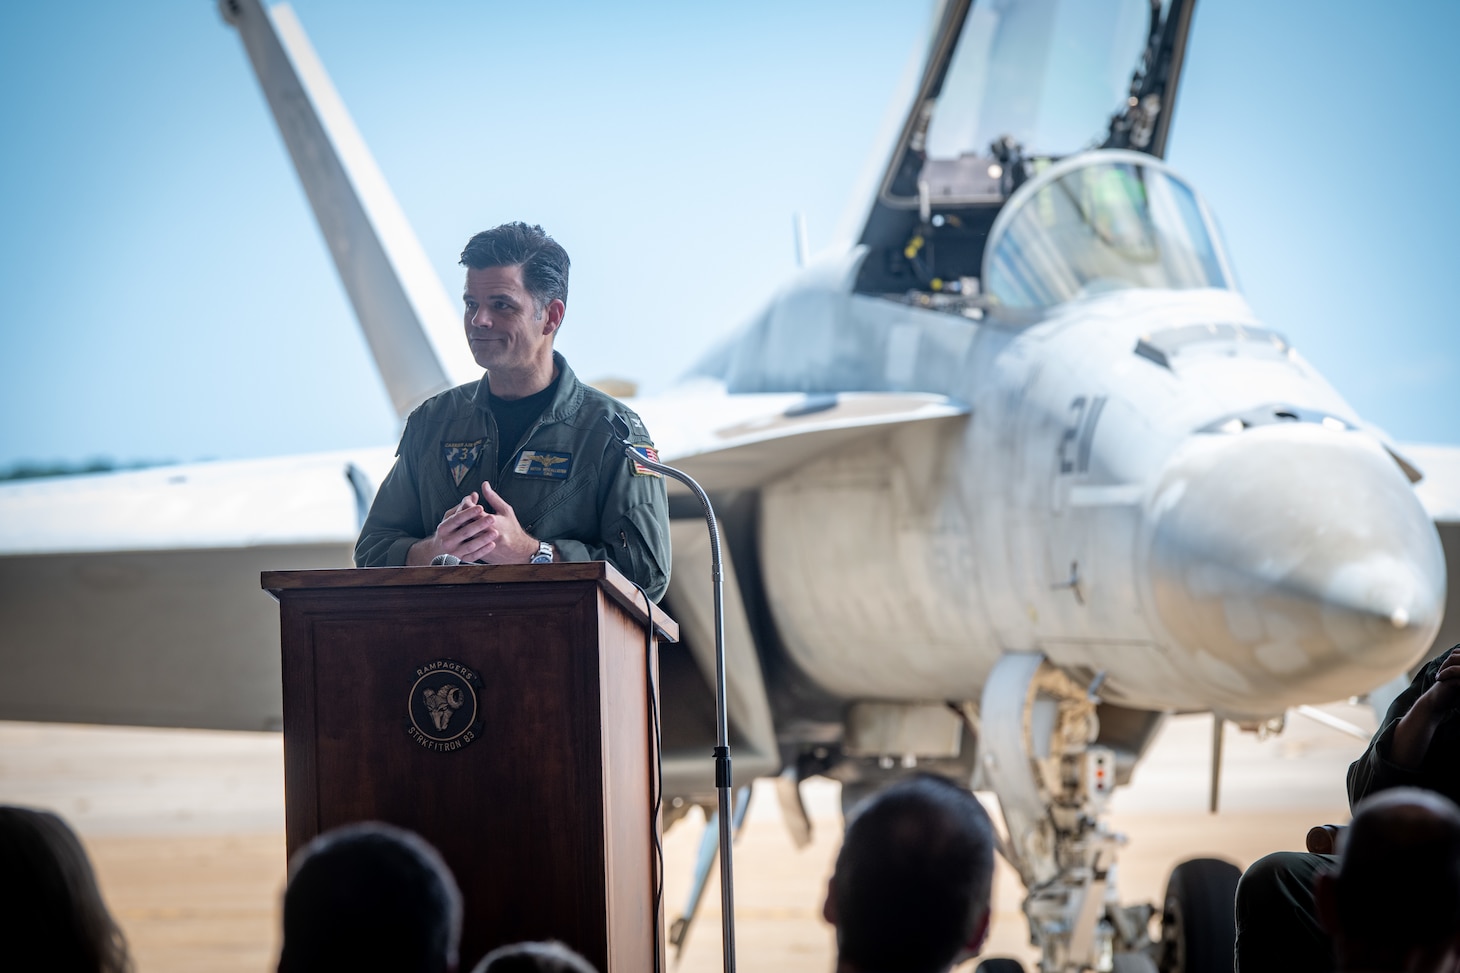 Pilot speaks at a podium in front of jets